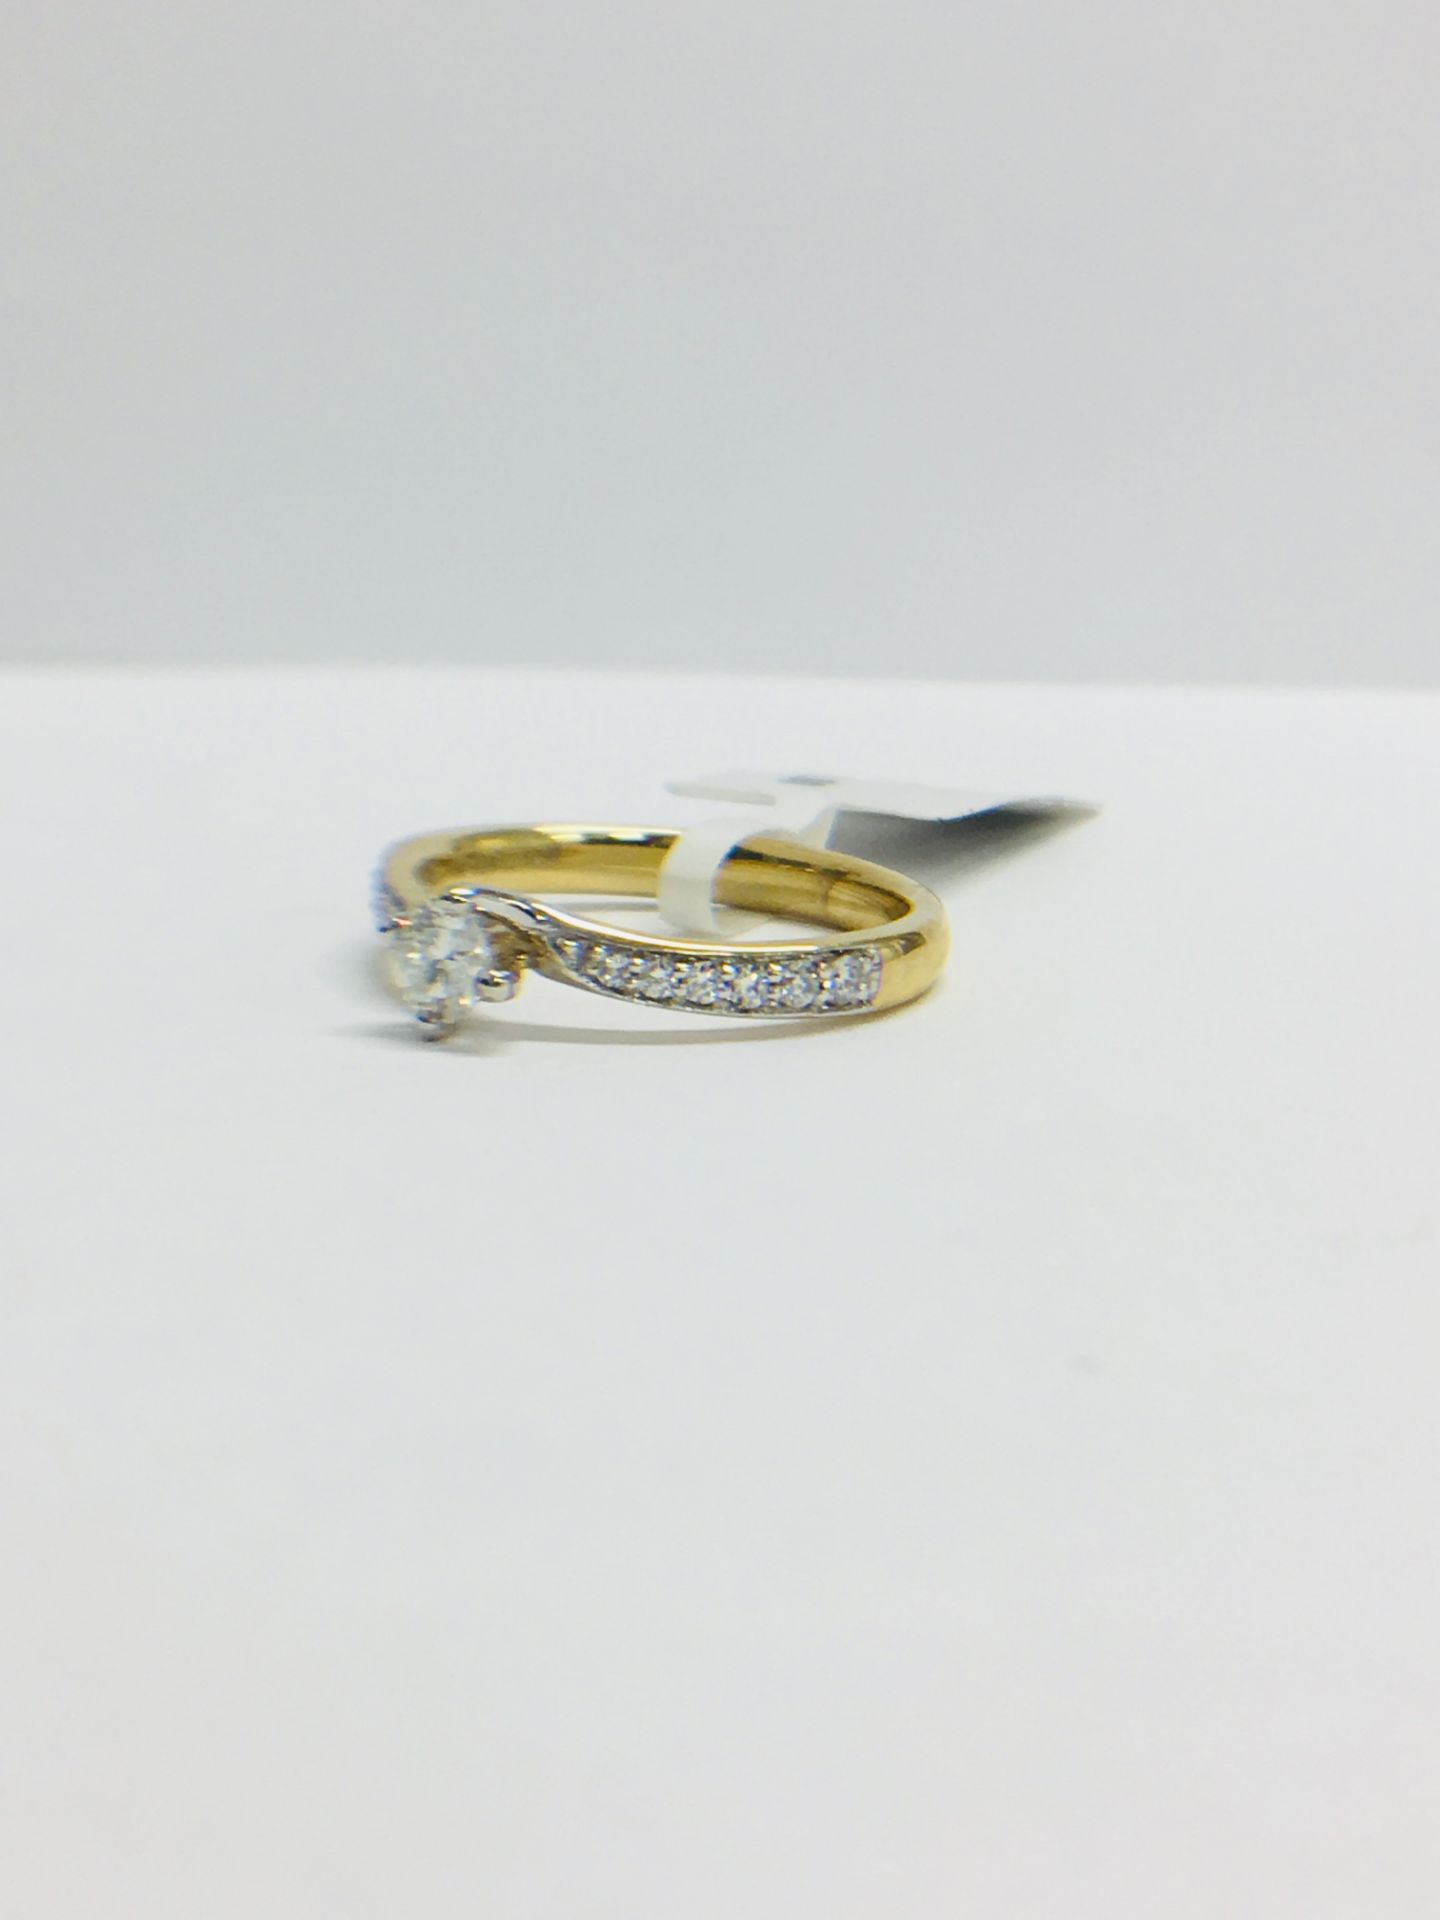 9ct Yellow Gold diamond Solitaire twist style ring - Image 2 of 11